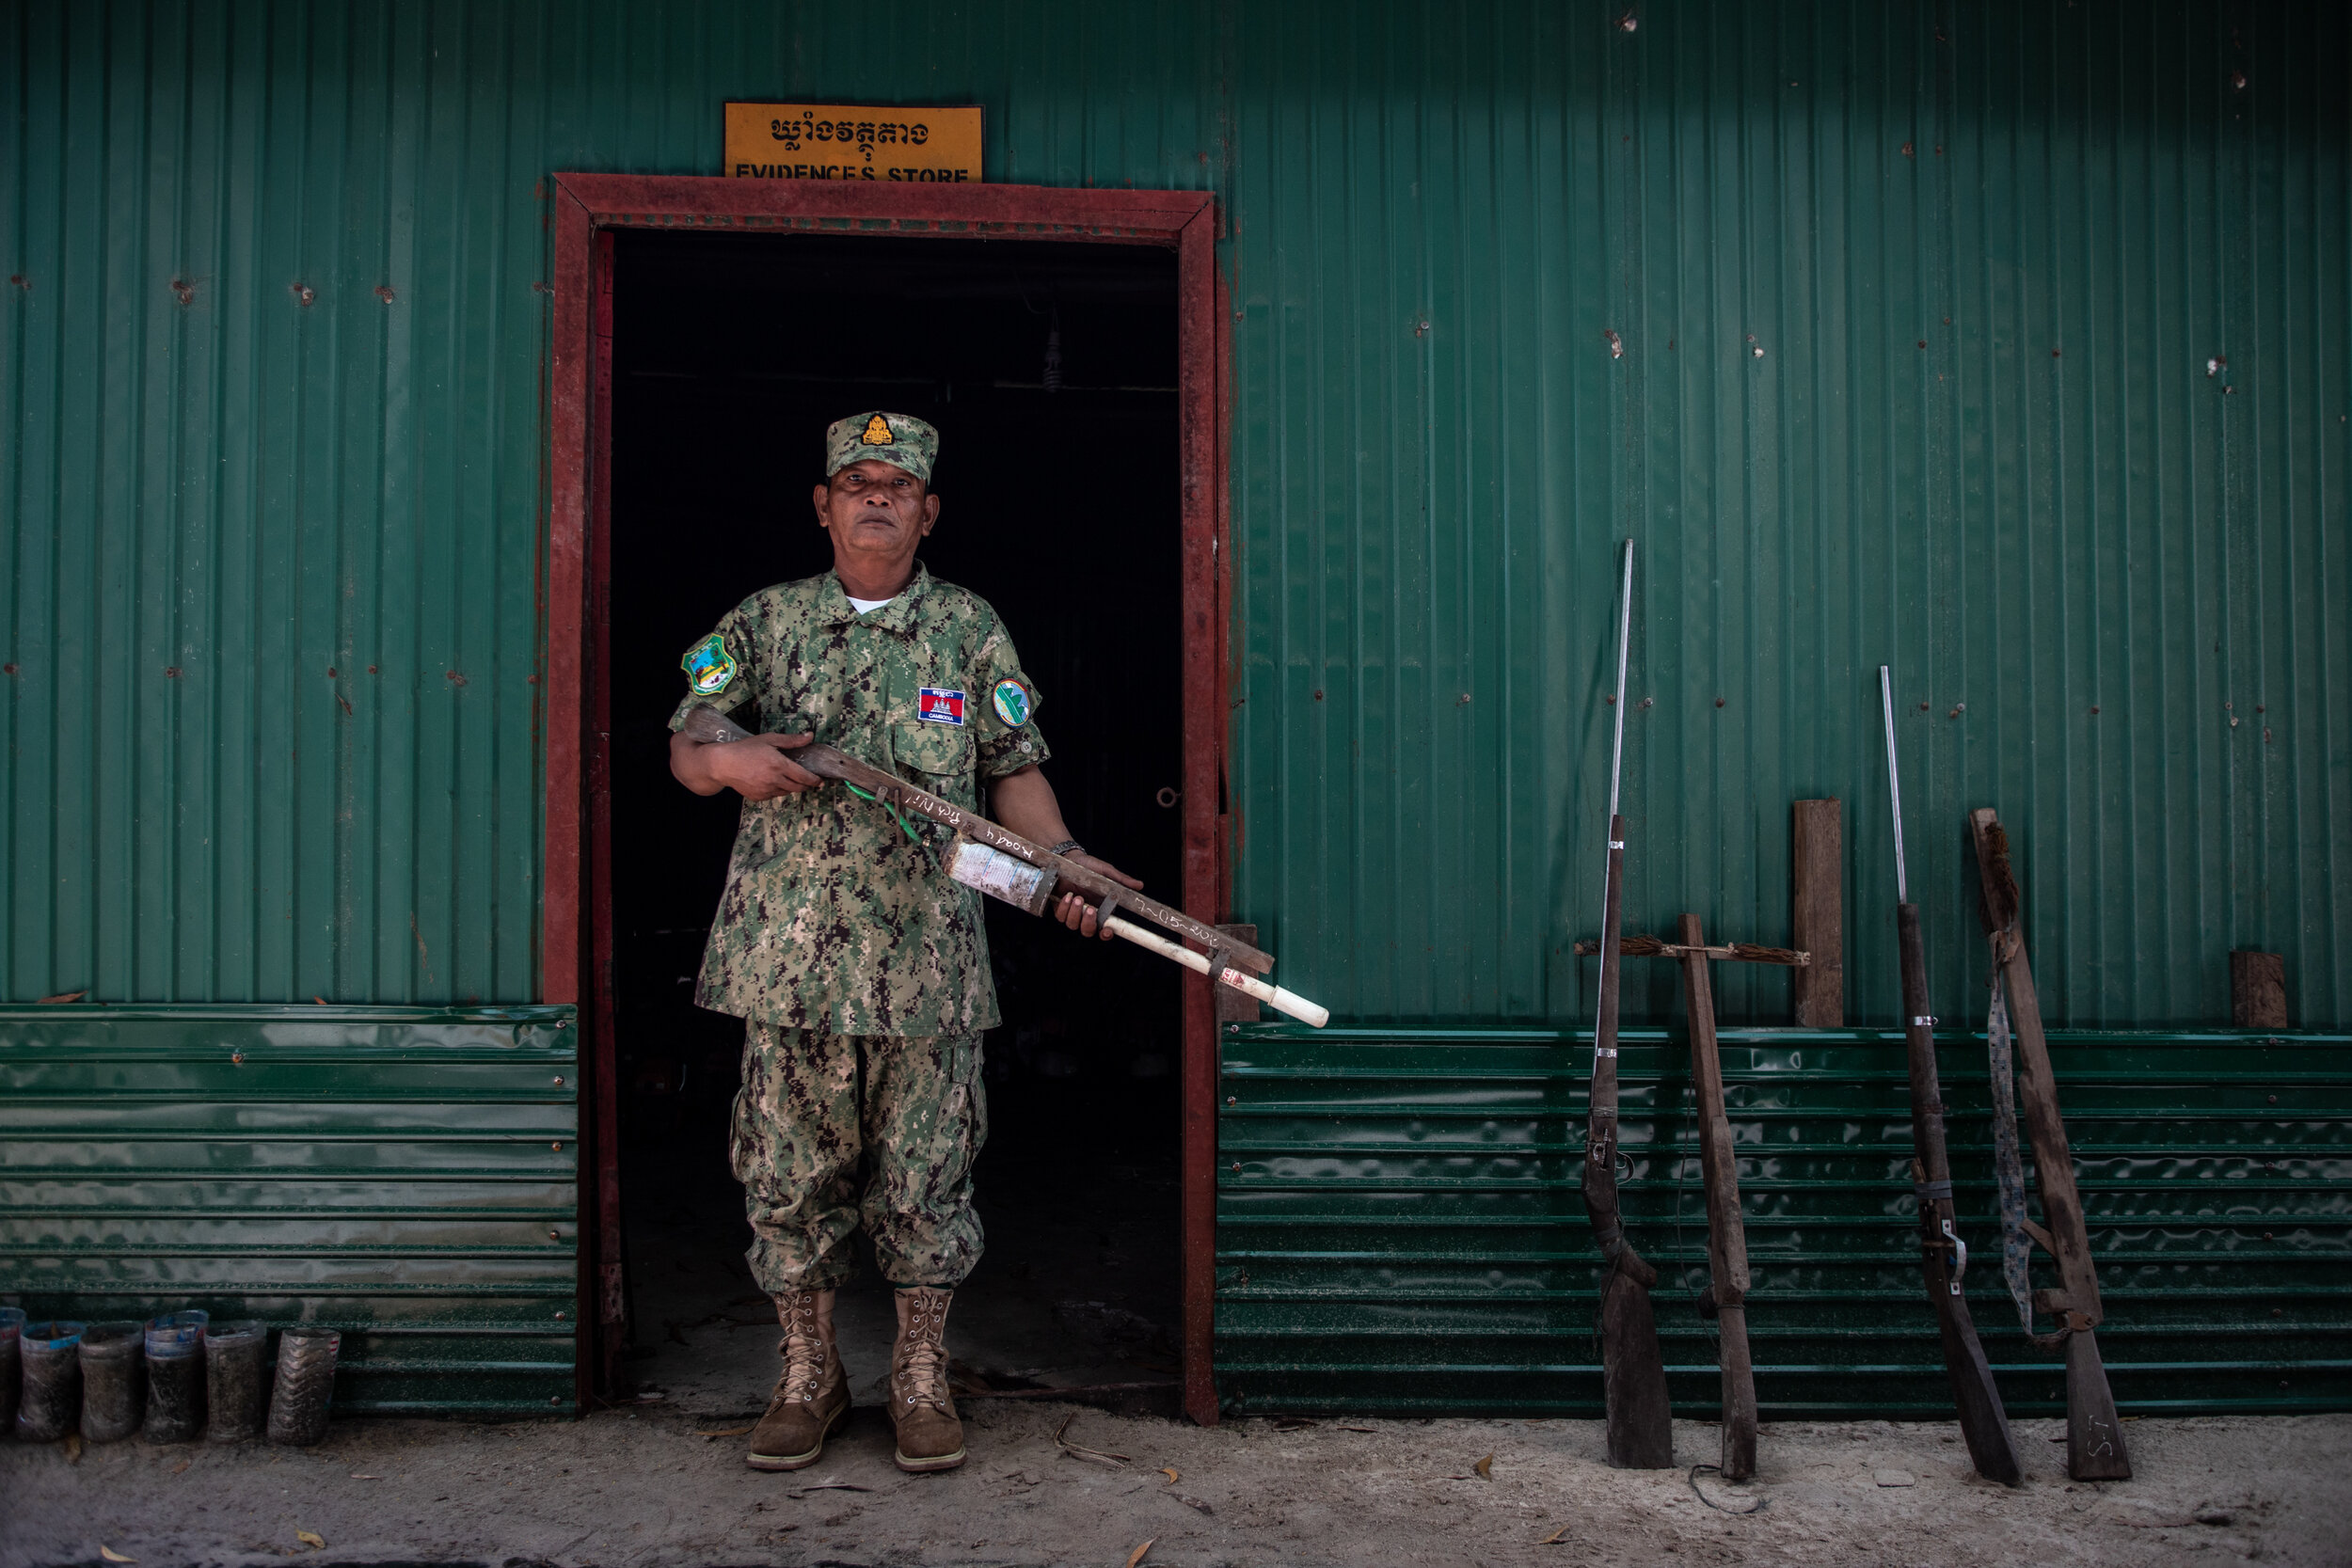  Ranger So Sokun, 57, shows some examples of the confiscated homemade hunting weapons used by poachers in the Cardamon Forrest. They range from old fashioned gun-powder muskets to hand-pumped air rifles and crossbow slingshots. The rangers confiscate